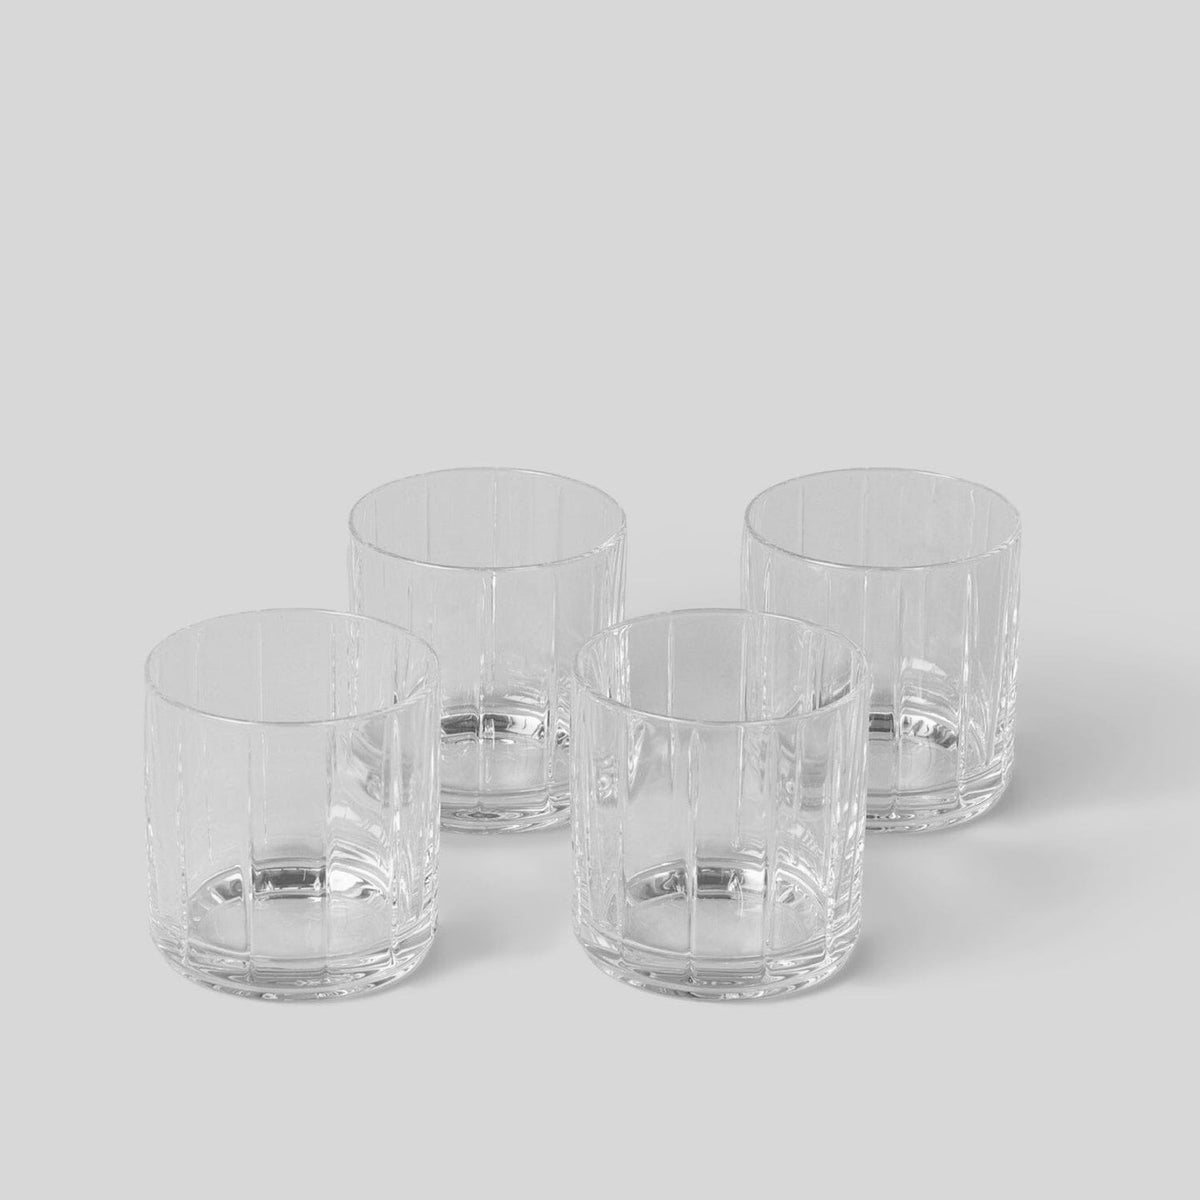 The Rocks Glasses by Fable